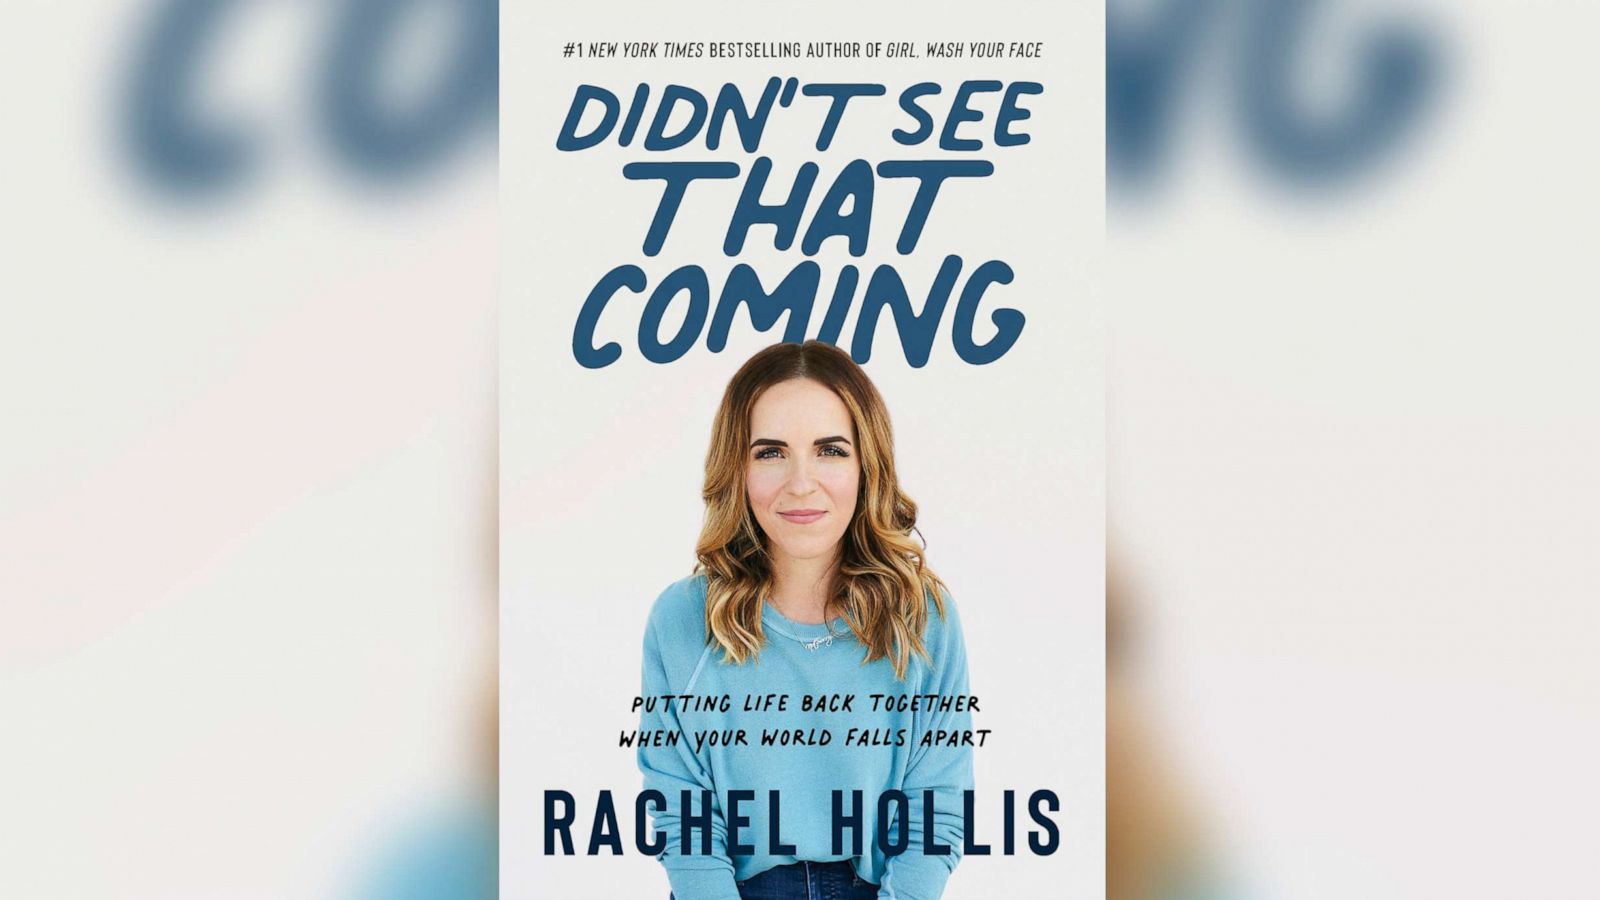 Start Today by Rachel Hollis Austin Collection